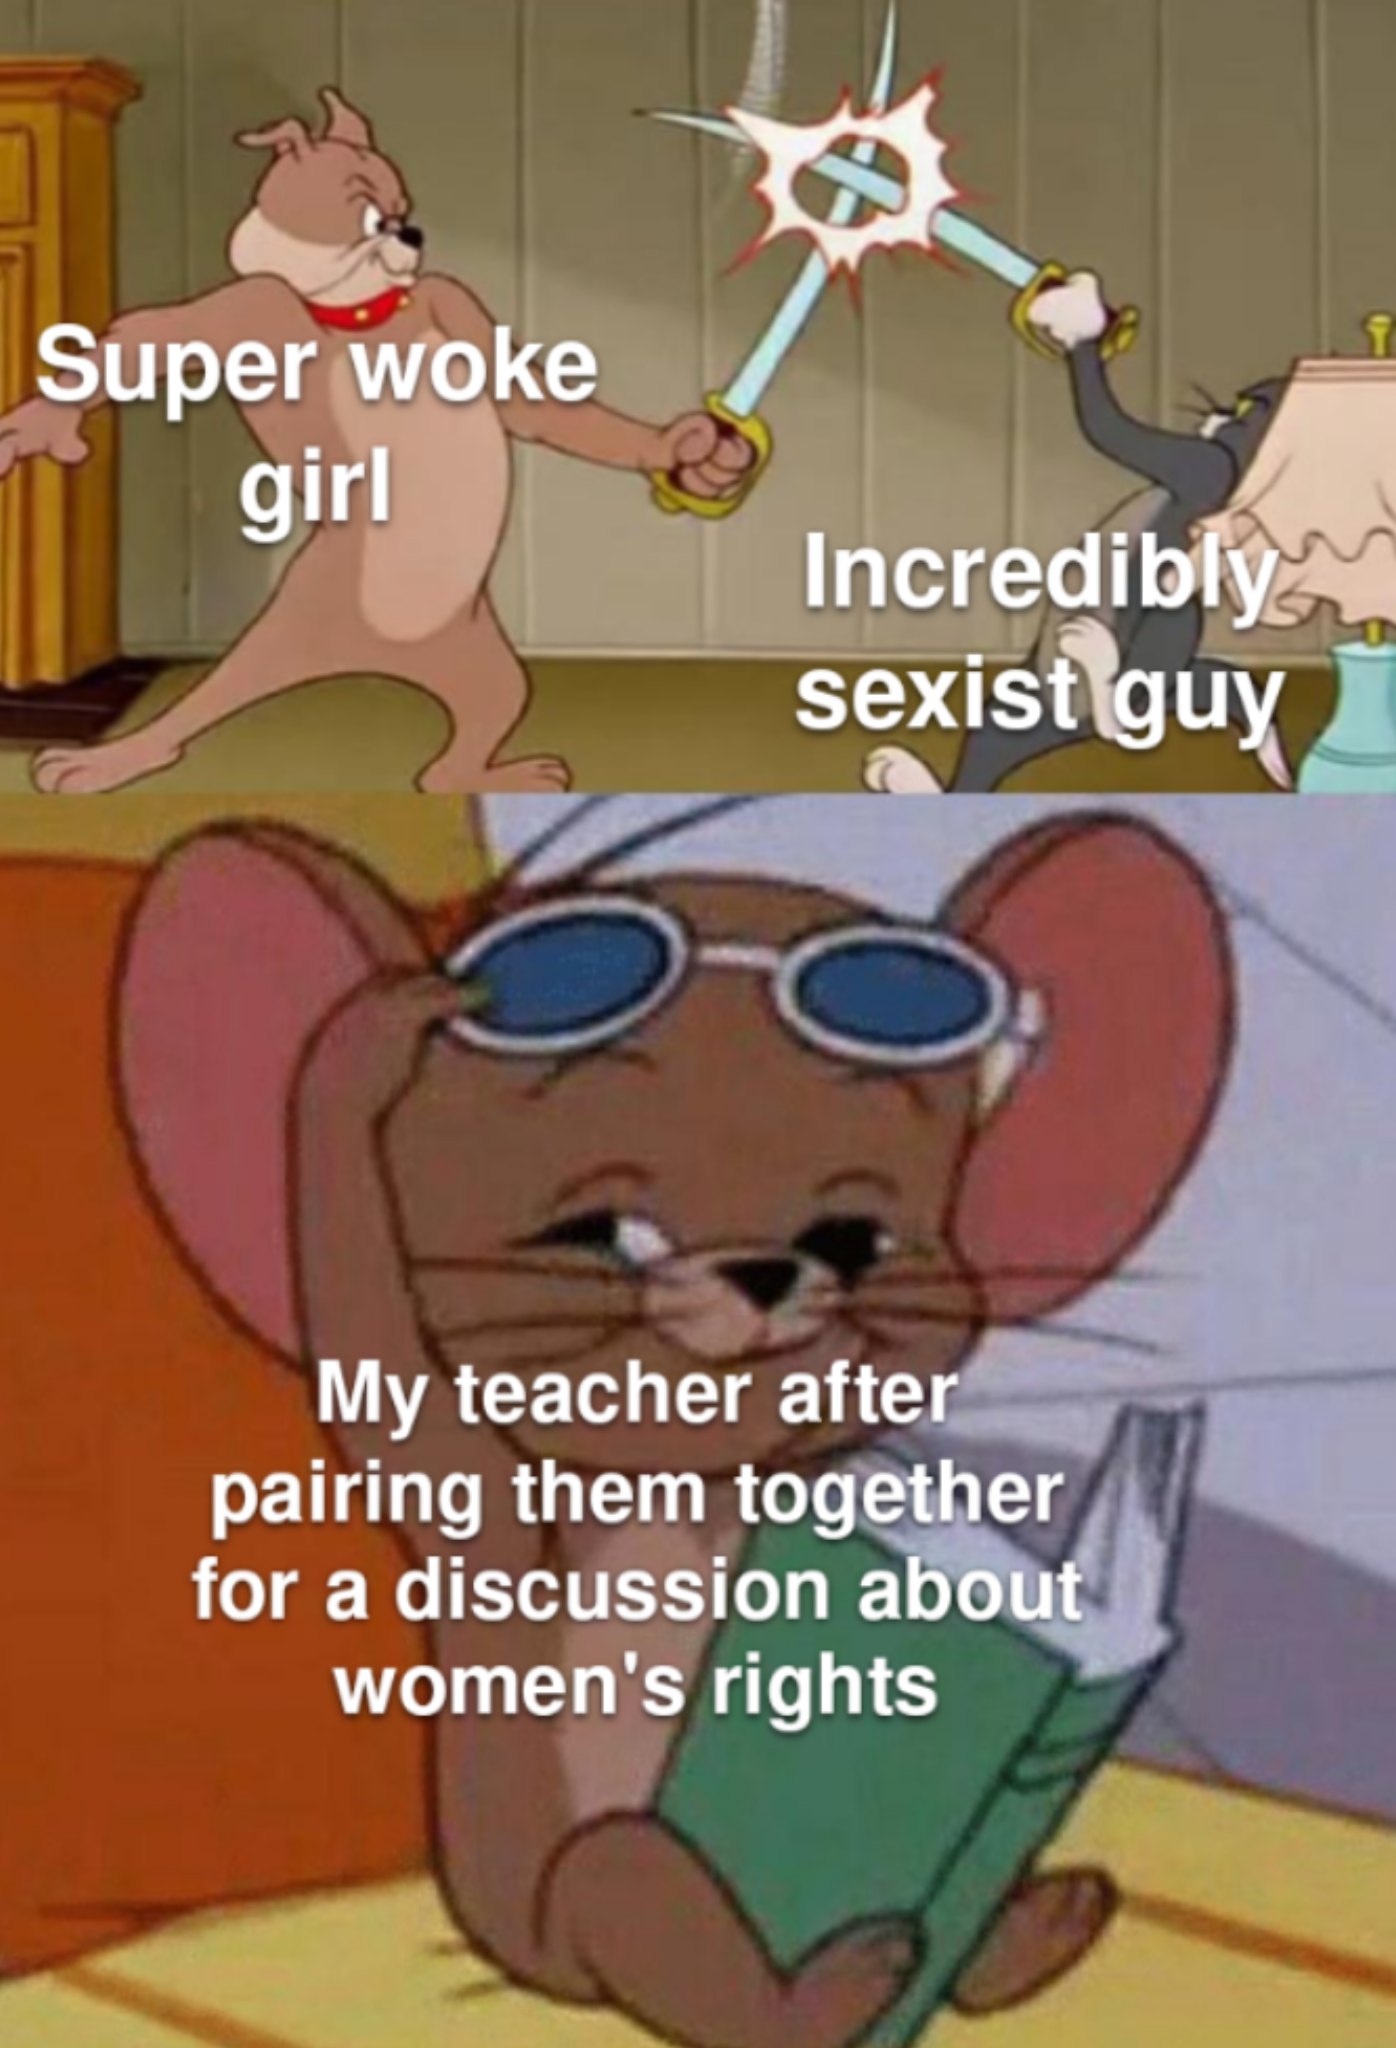 funny friday memes - cartoon - Super woke girl Incredibly sexist guy My teacher after pairing them together for a discussion about women's rights